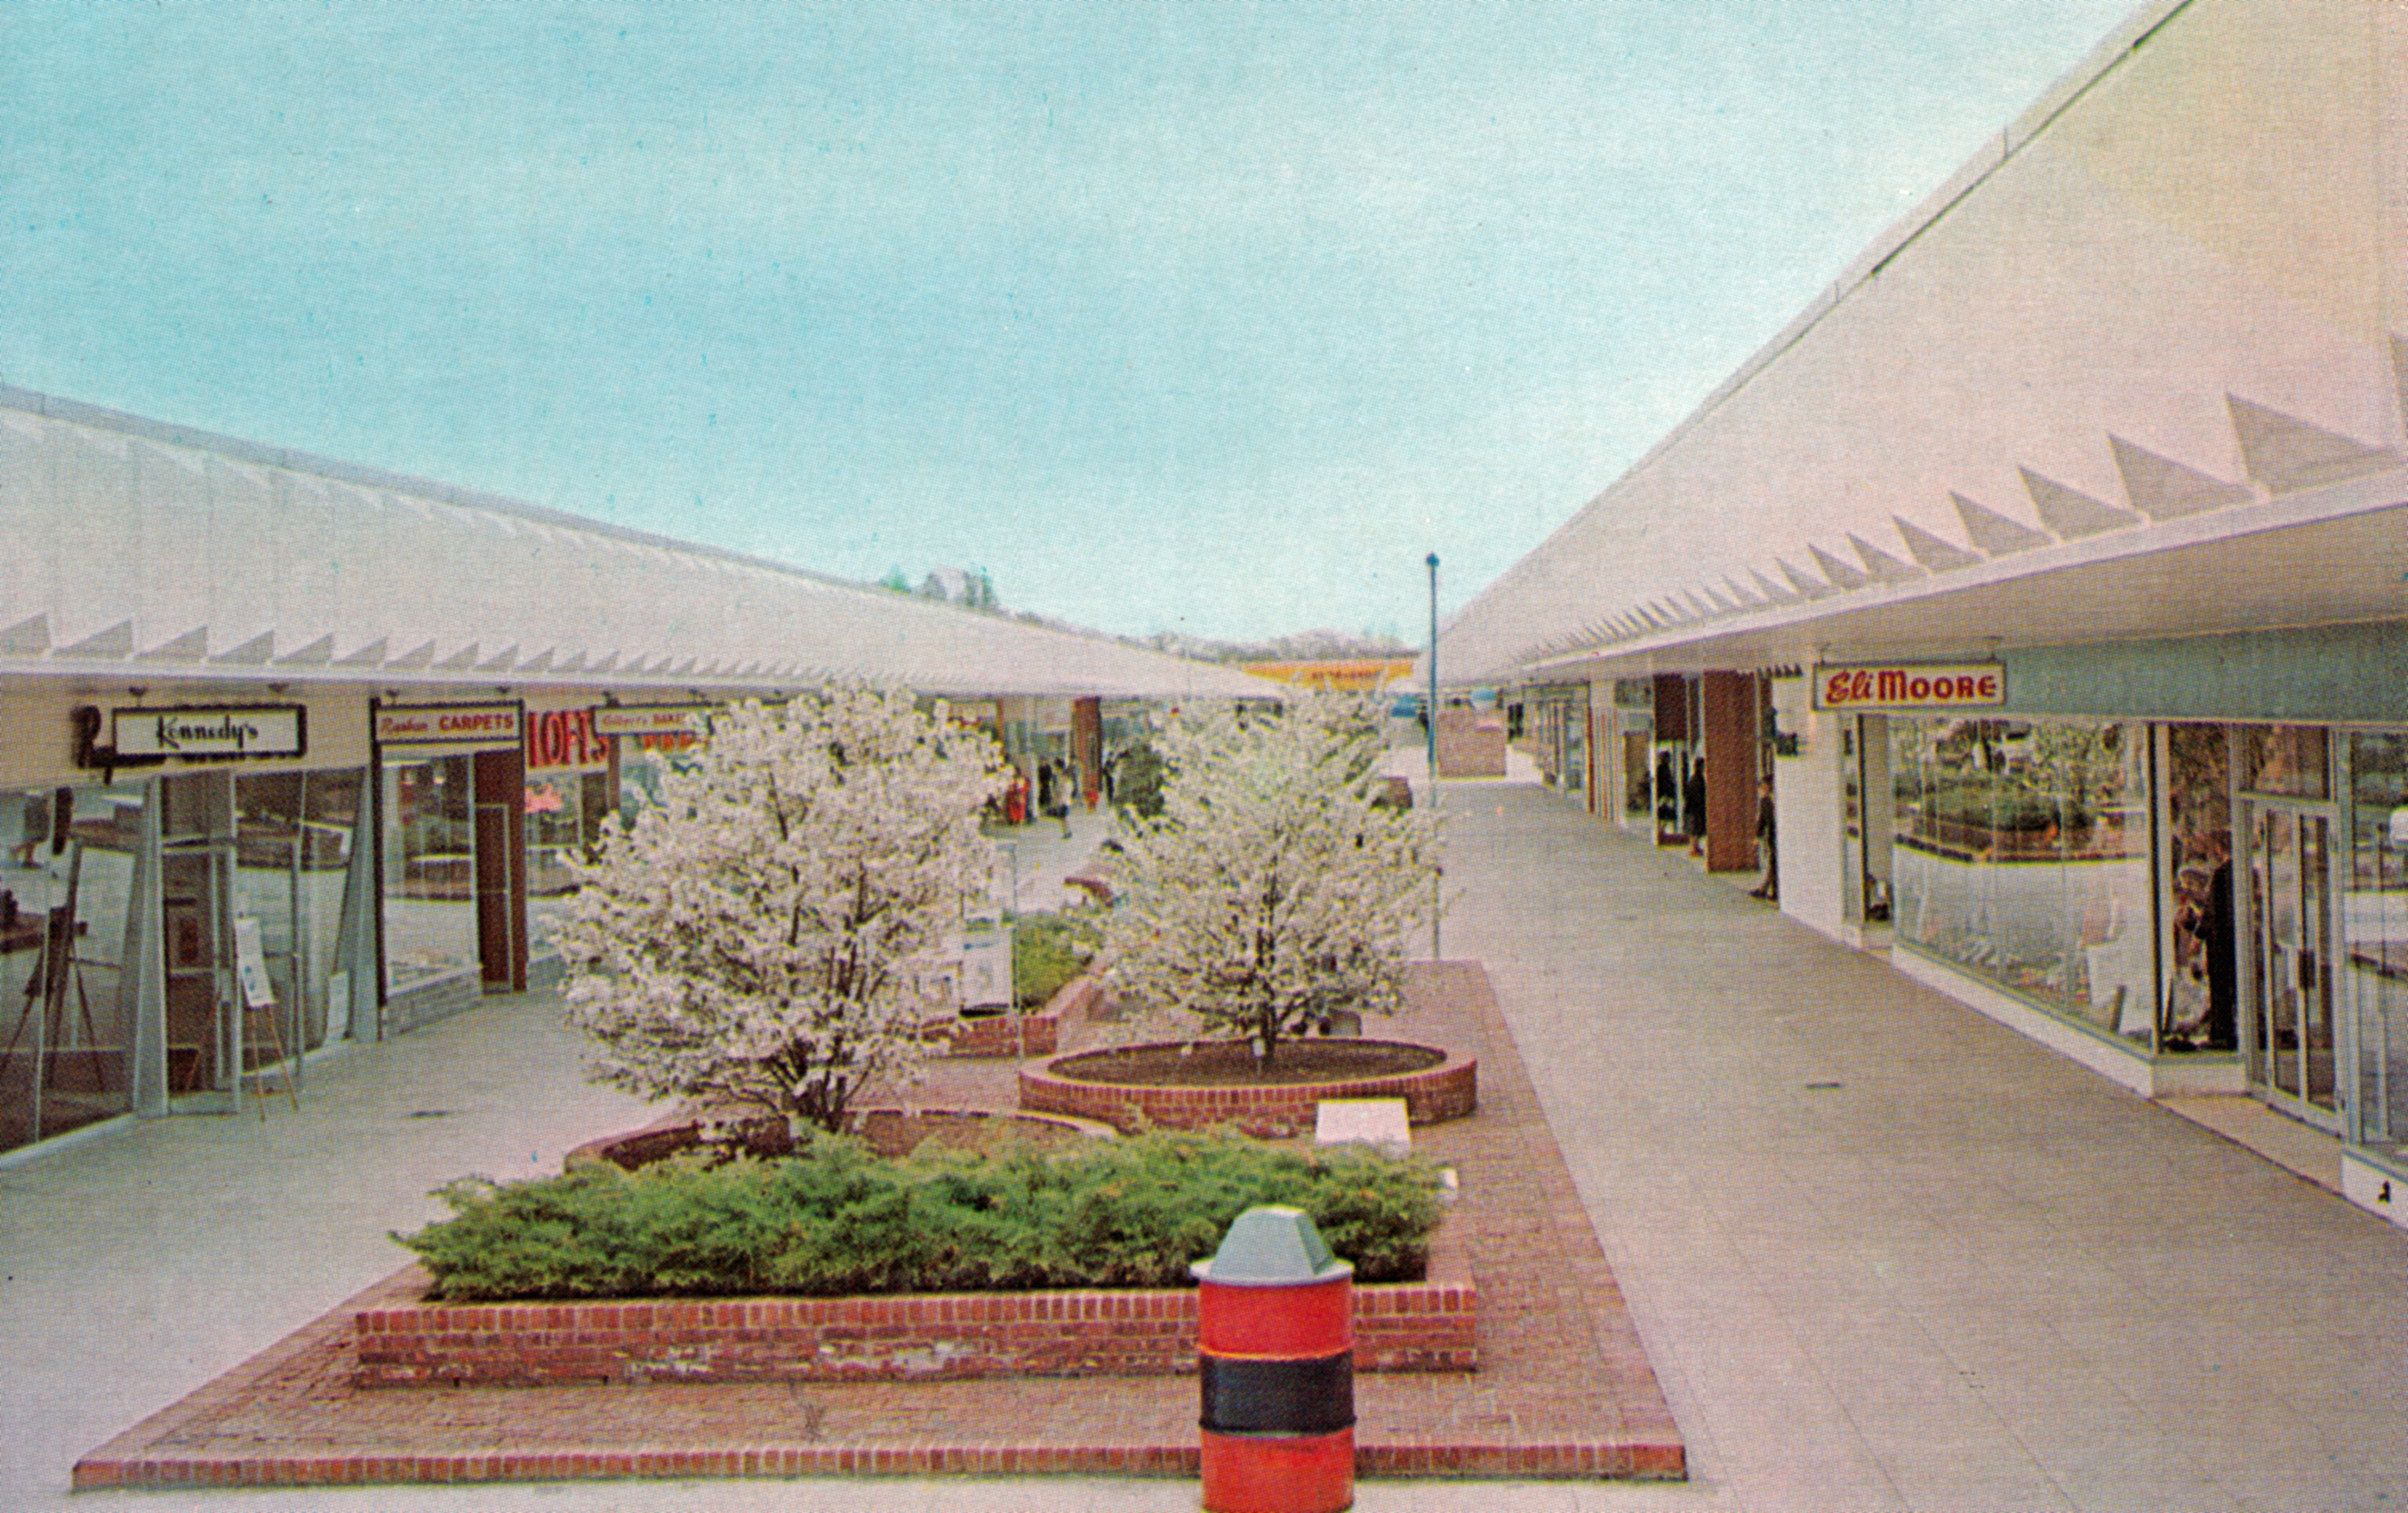 Connecticut Post Mall, Milford – CT Postcards.net